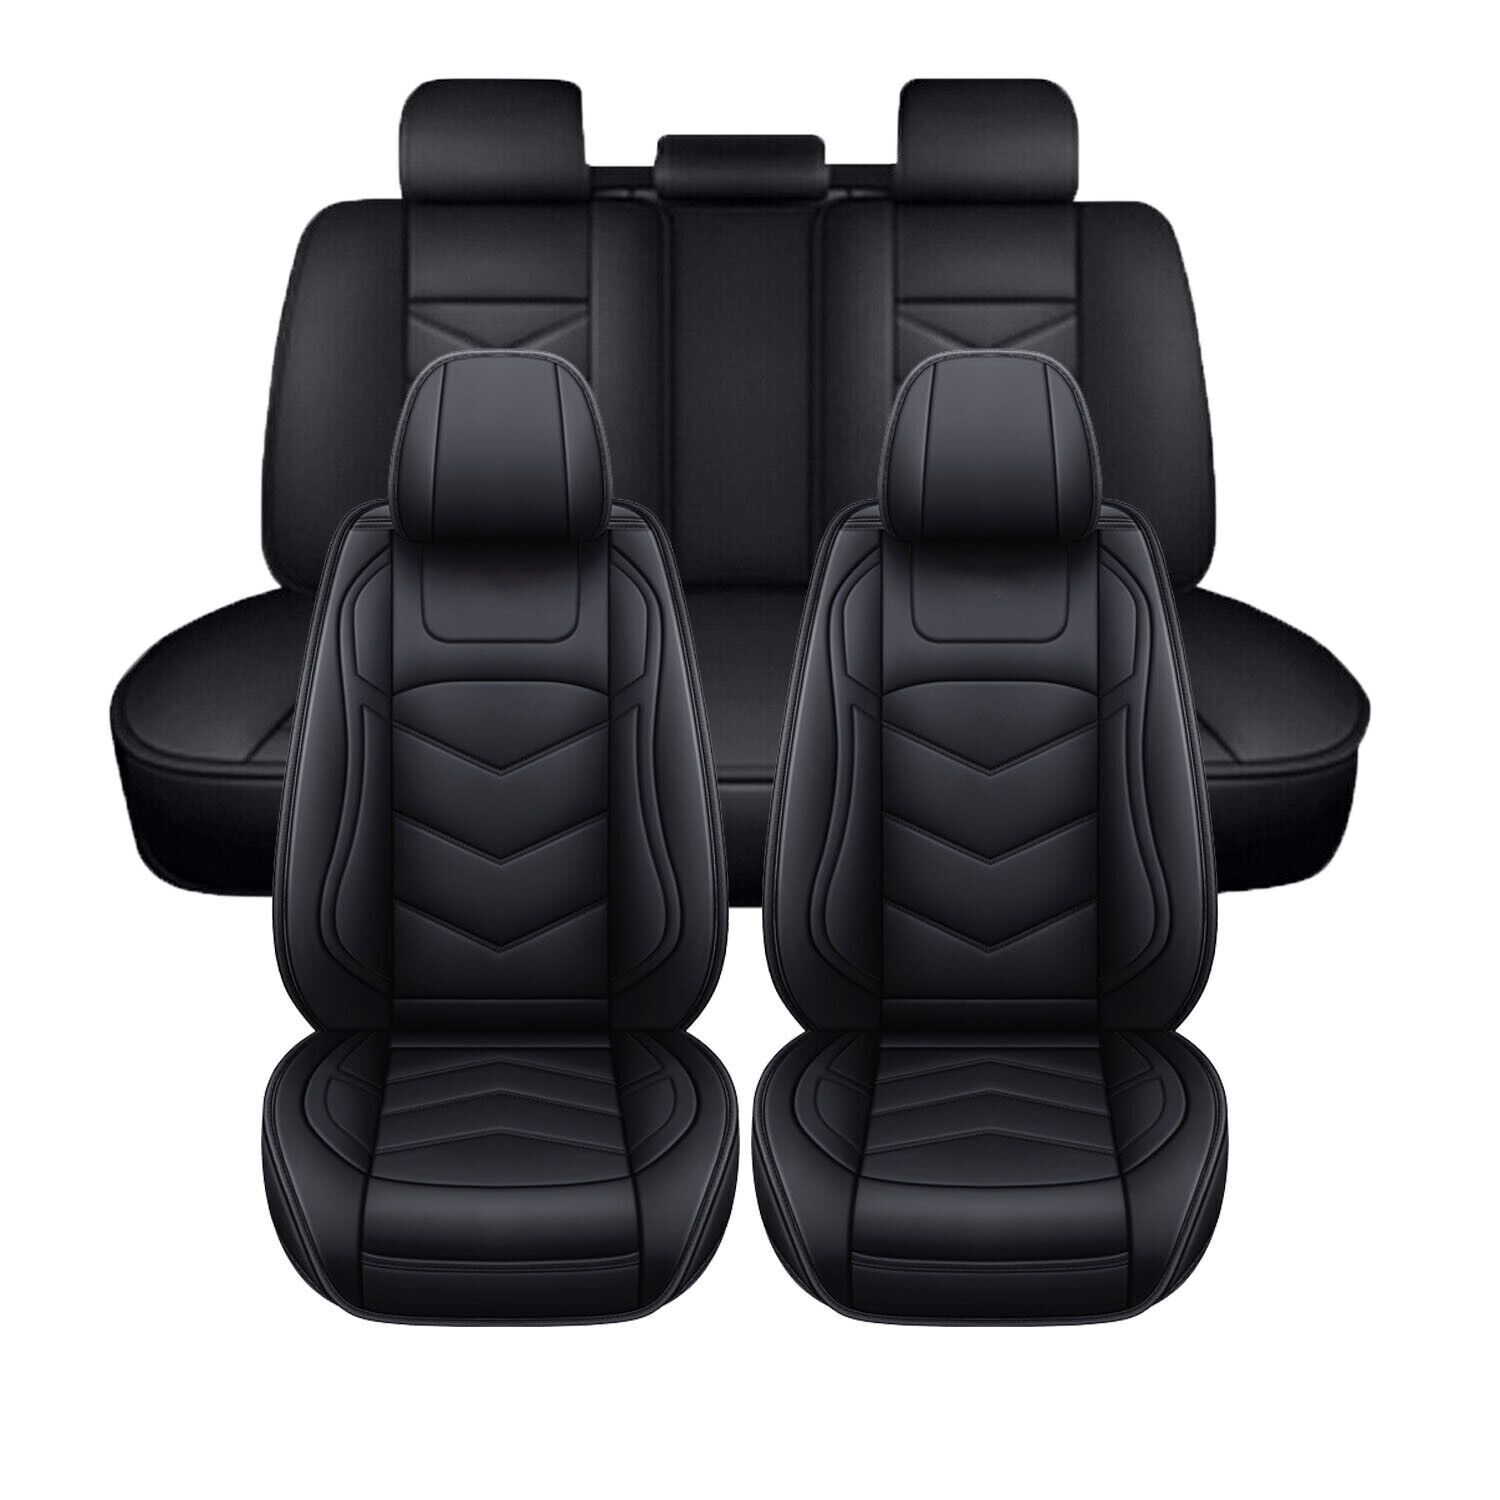 For Acura TLX RDX MDX TSX Car Seat Cover Front Rear Full Set Leather Protector